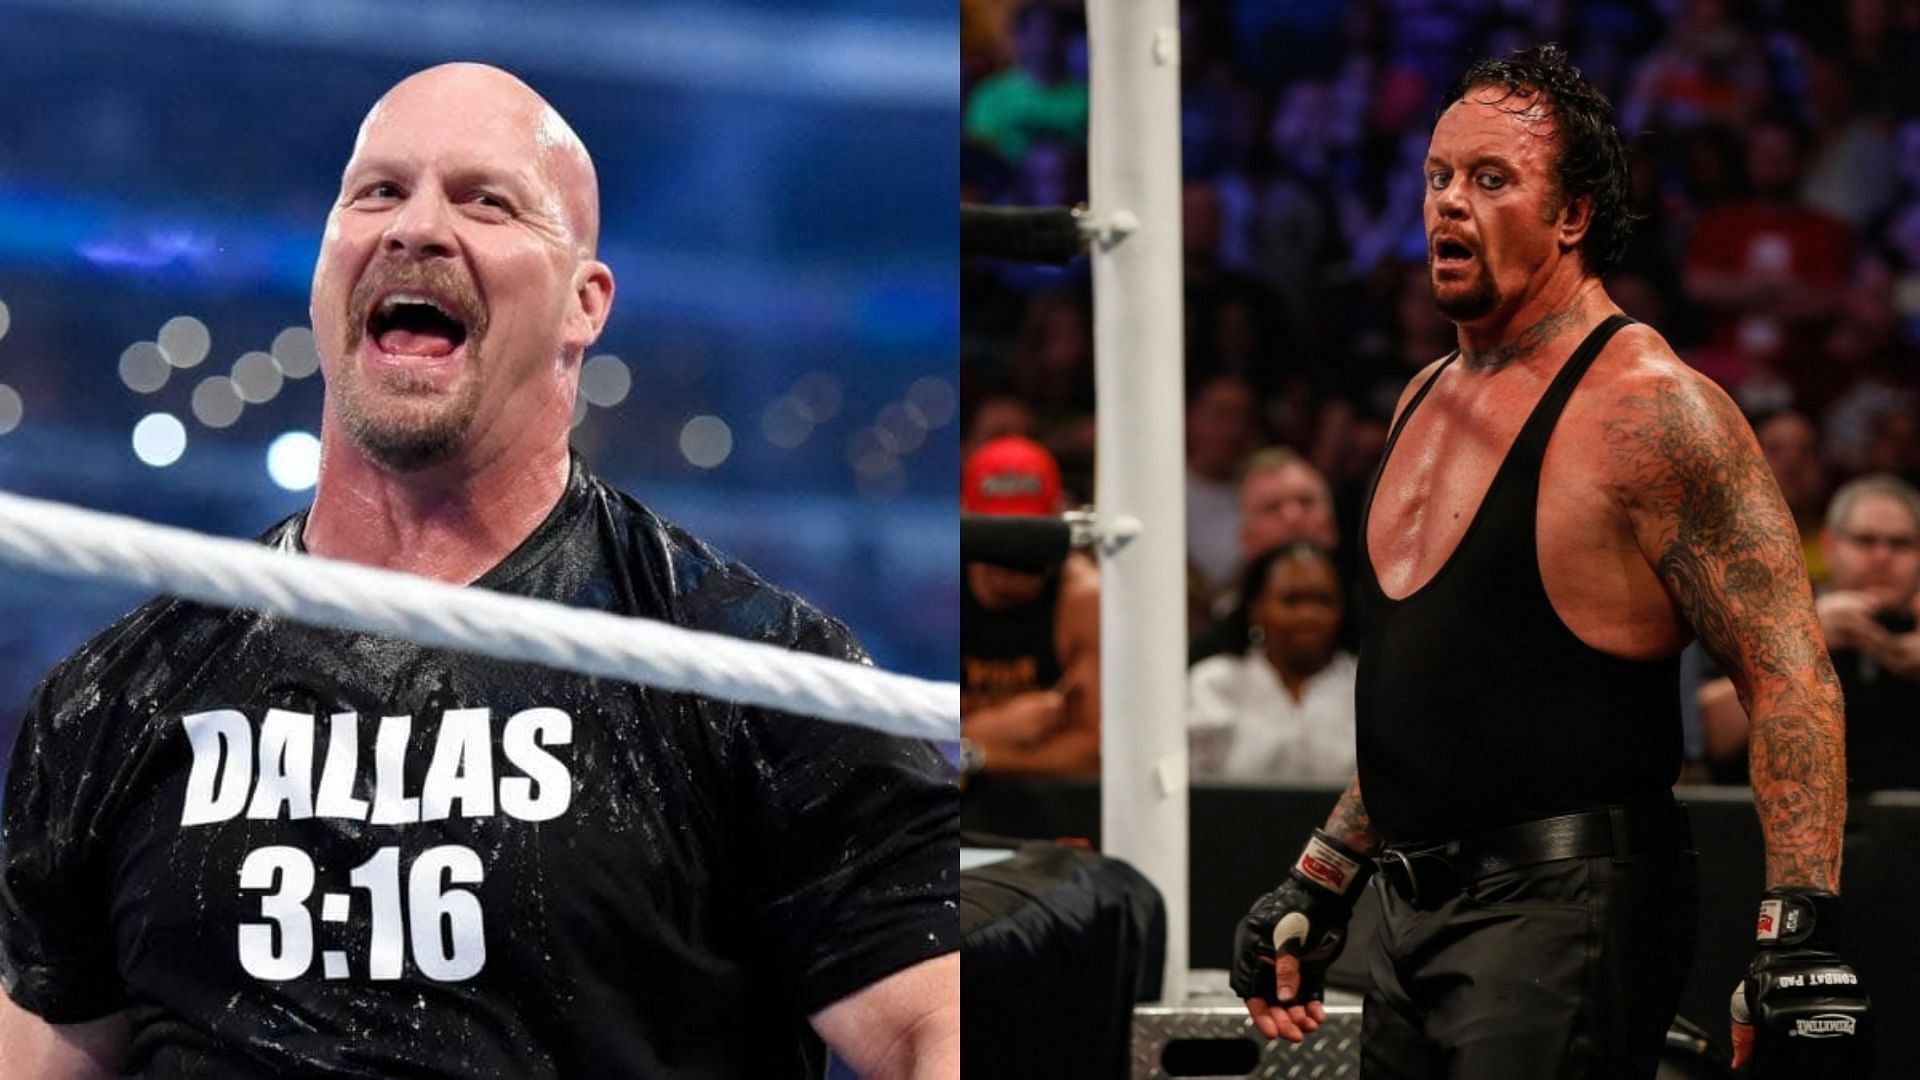 The Royal Rumble could see some mind-blowing returns